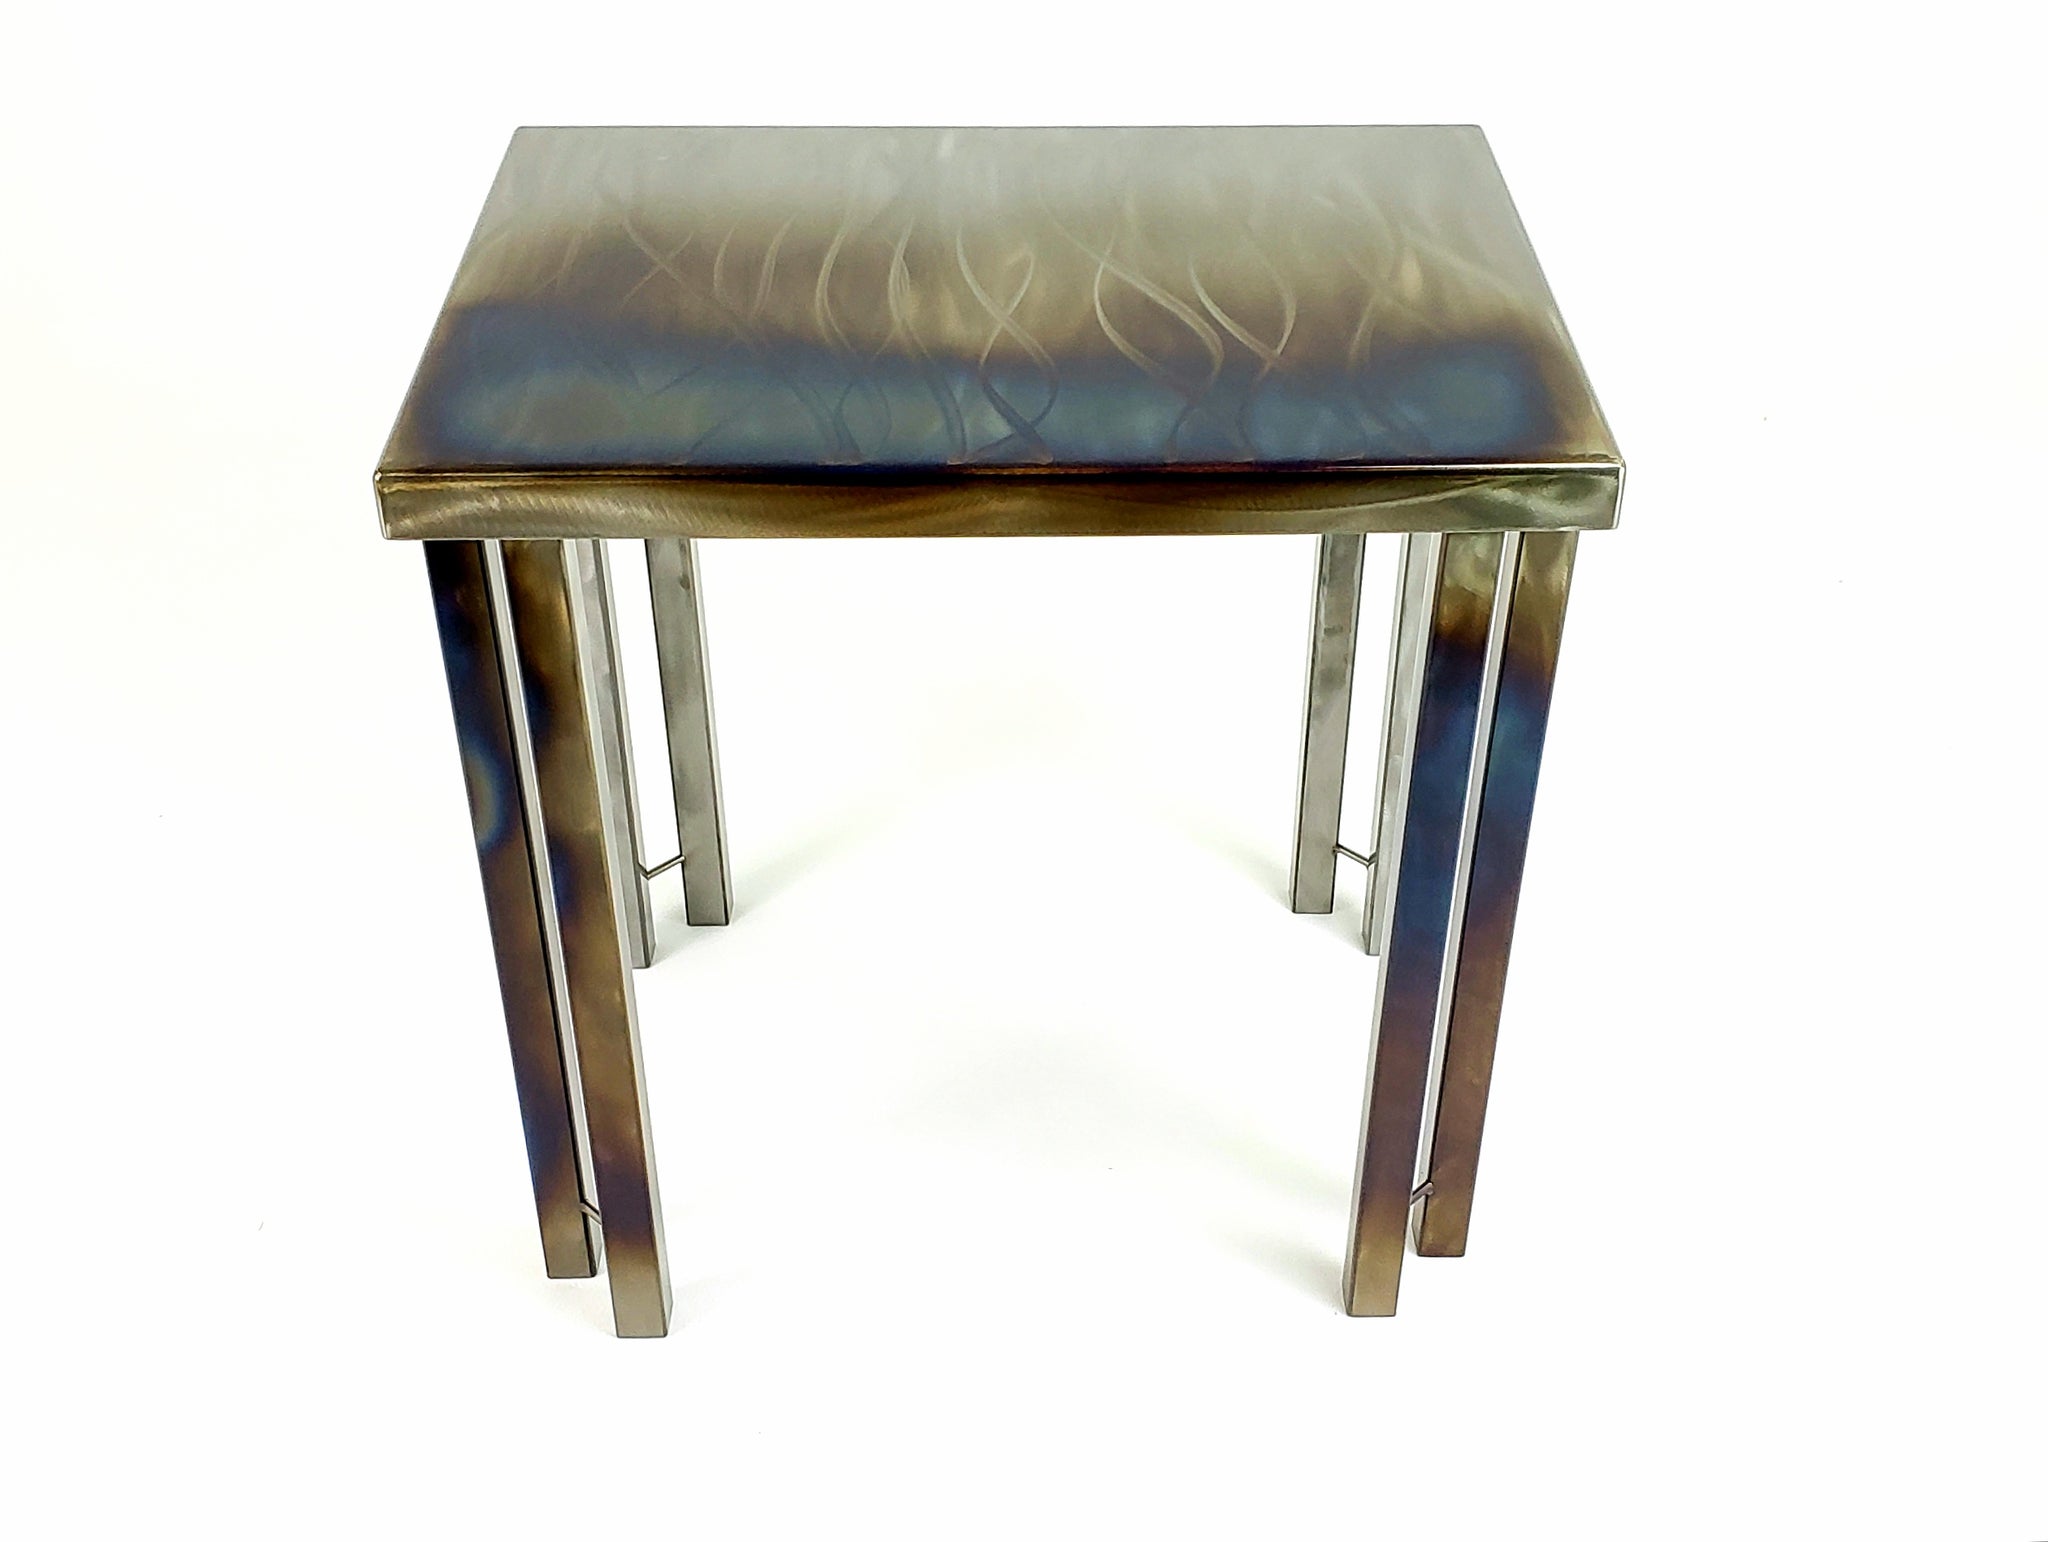 Contemporary Steel Side Table